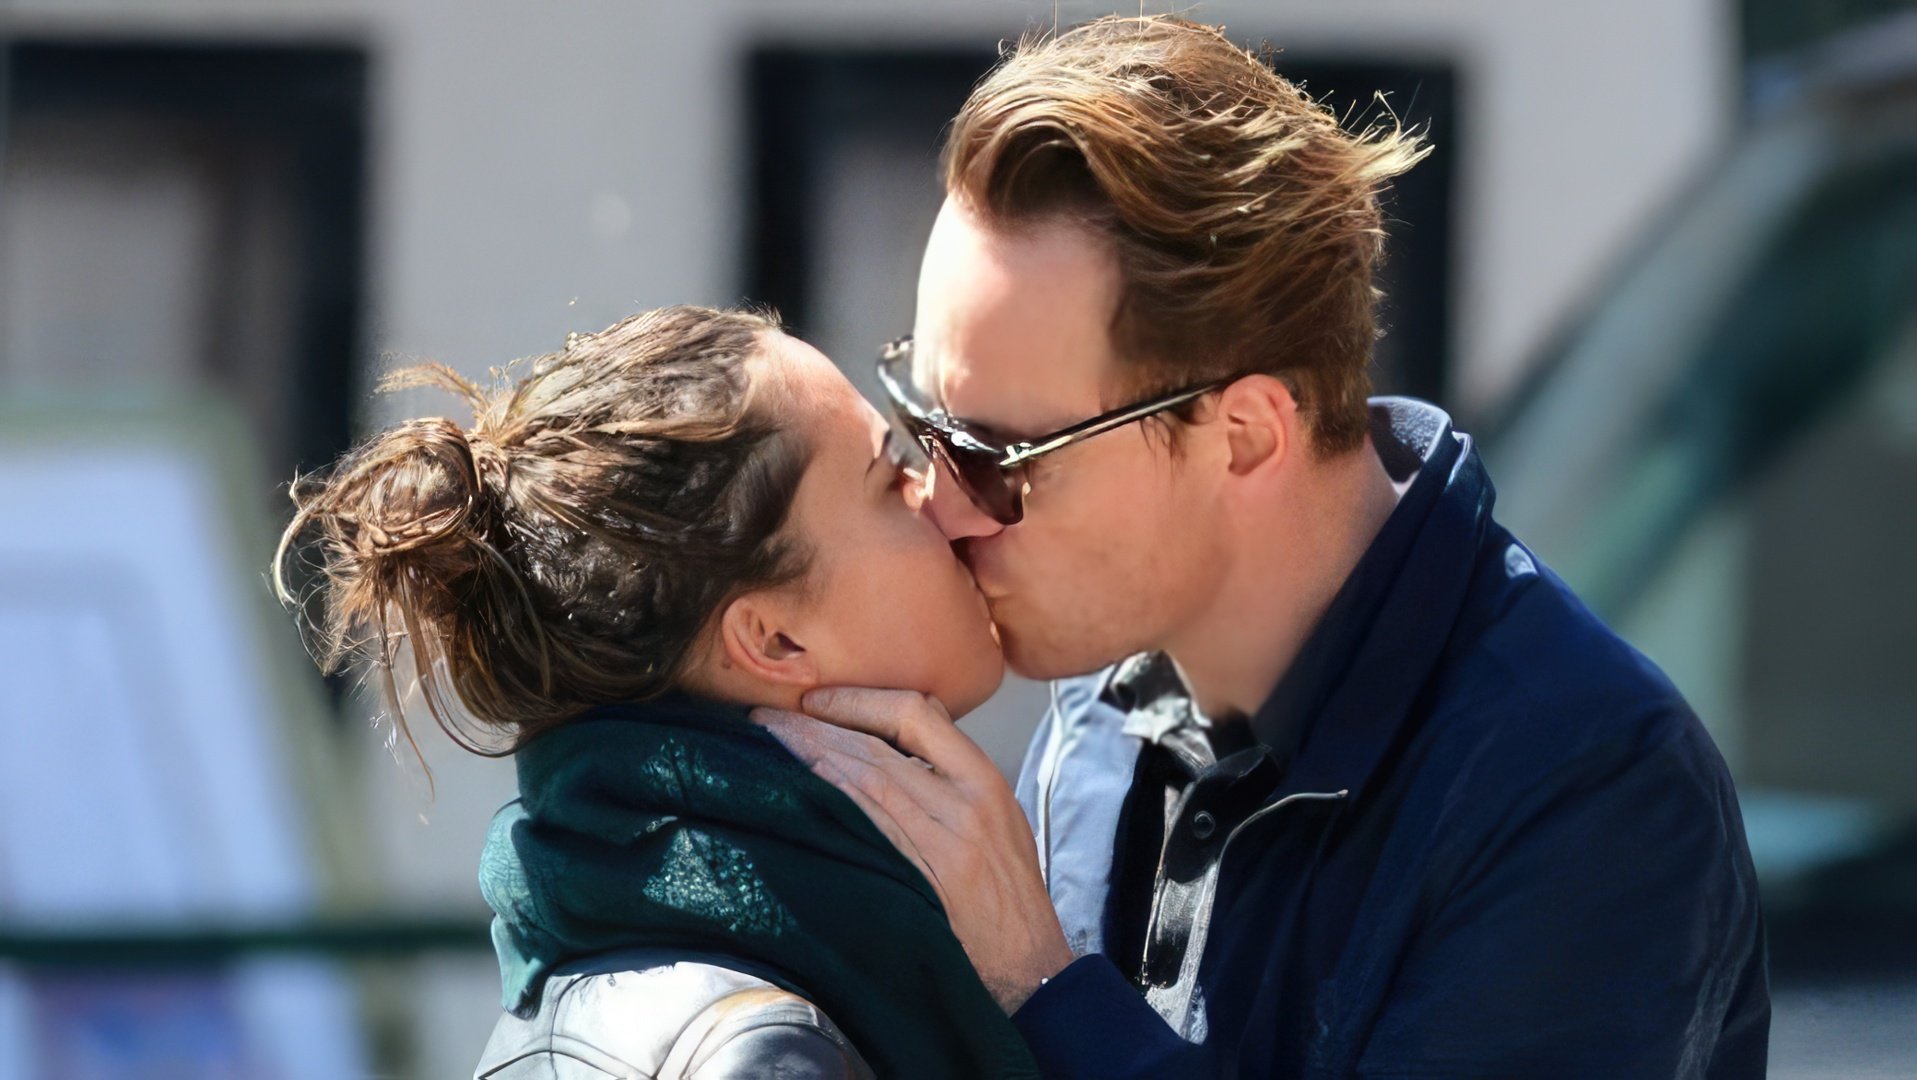 Alicia Vikander and Michael Fassbender met on The Light Between Oceans filming